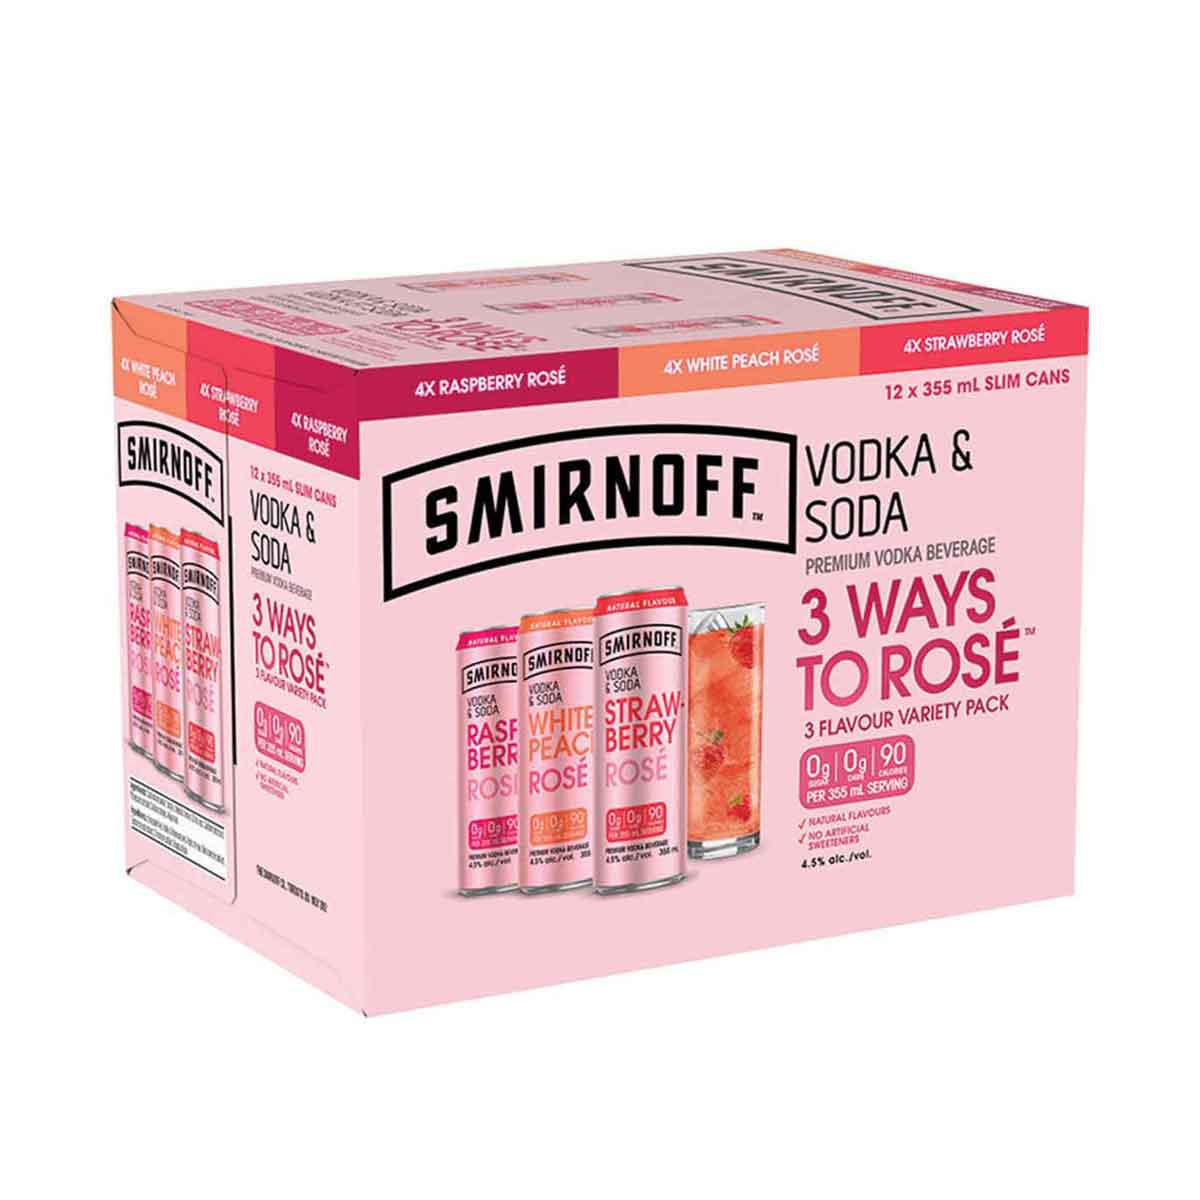 Tag Liquor Stores Delivery BC - Smirnoff Ice Pink Lemonade 6 Pack Cans –